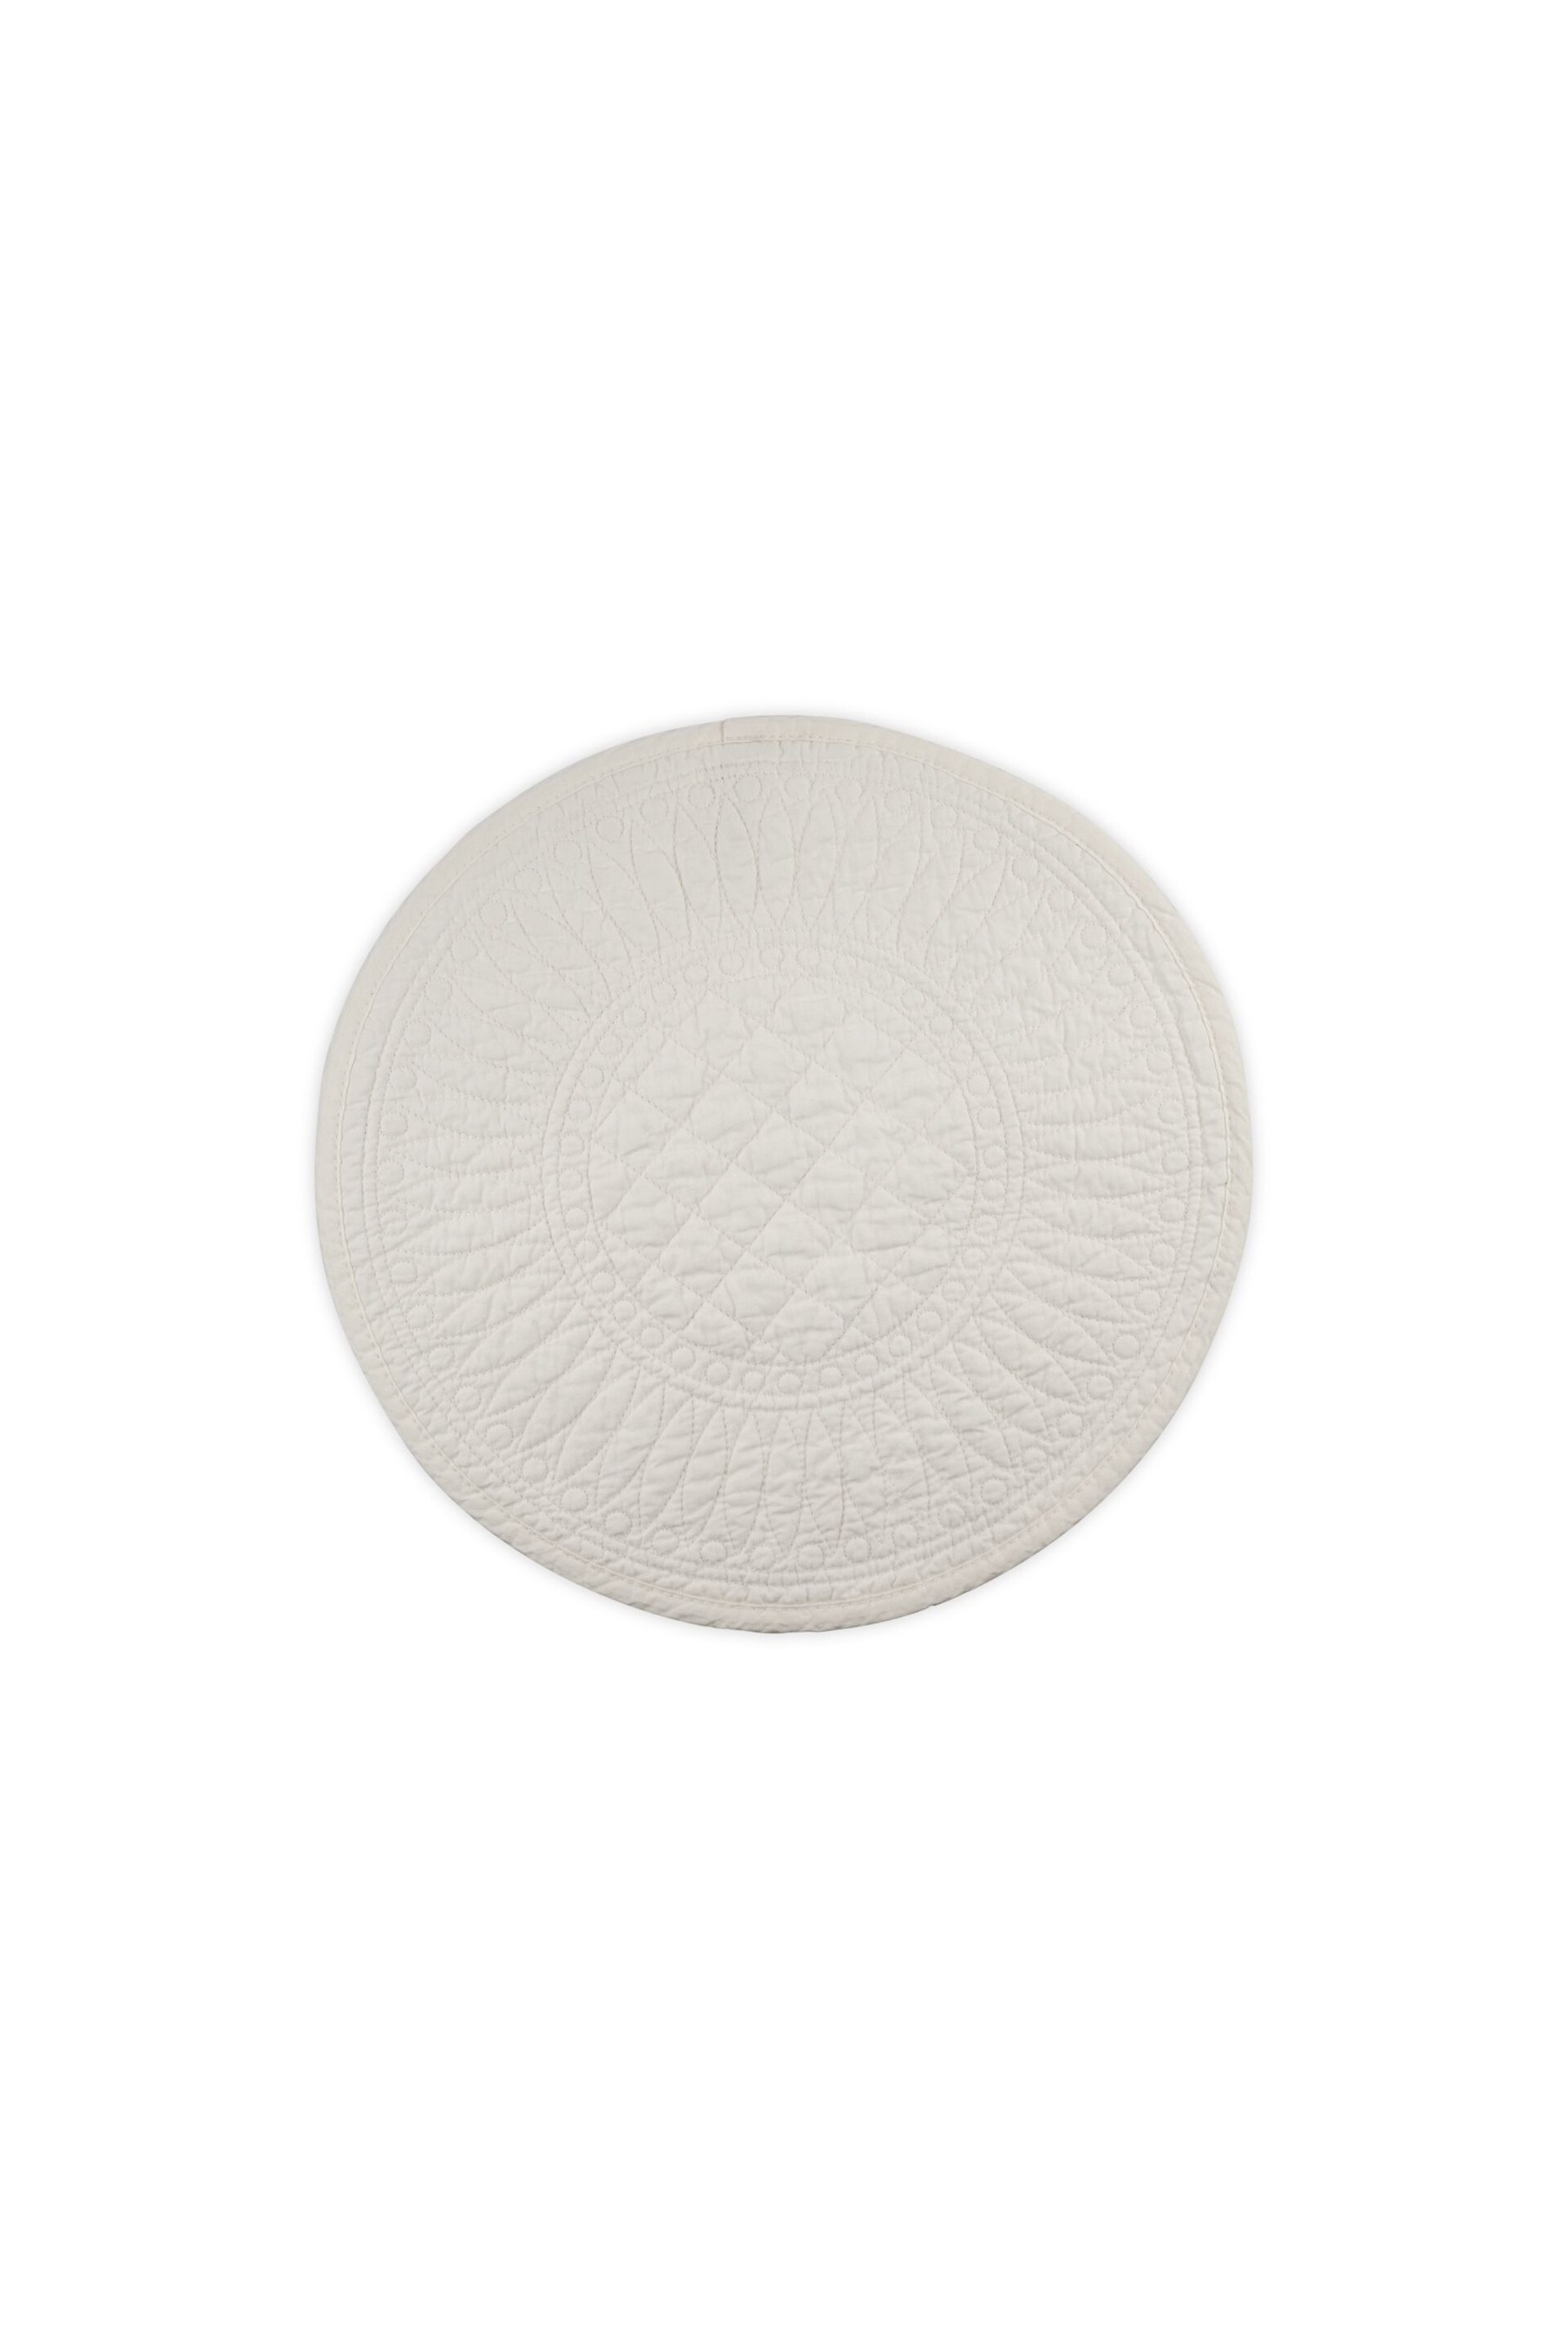 Mary Berry Natural Signature Cotton Ivory Placemat - Image 3 of 4